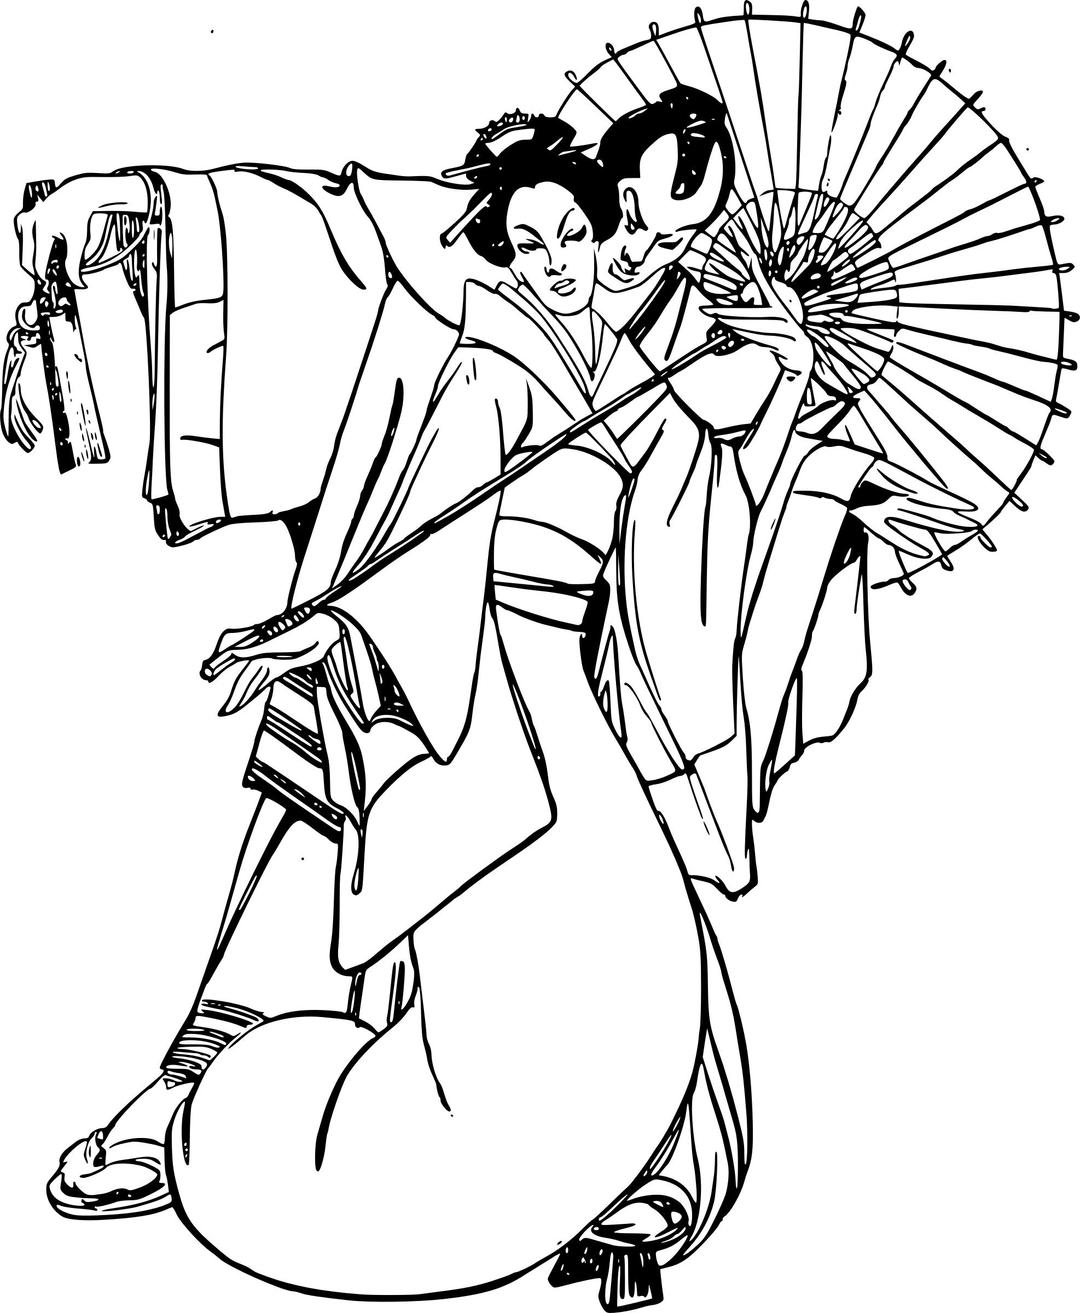 Stylized Japanese Couple png transparent